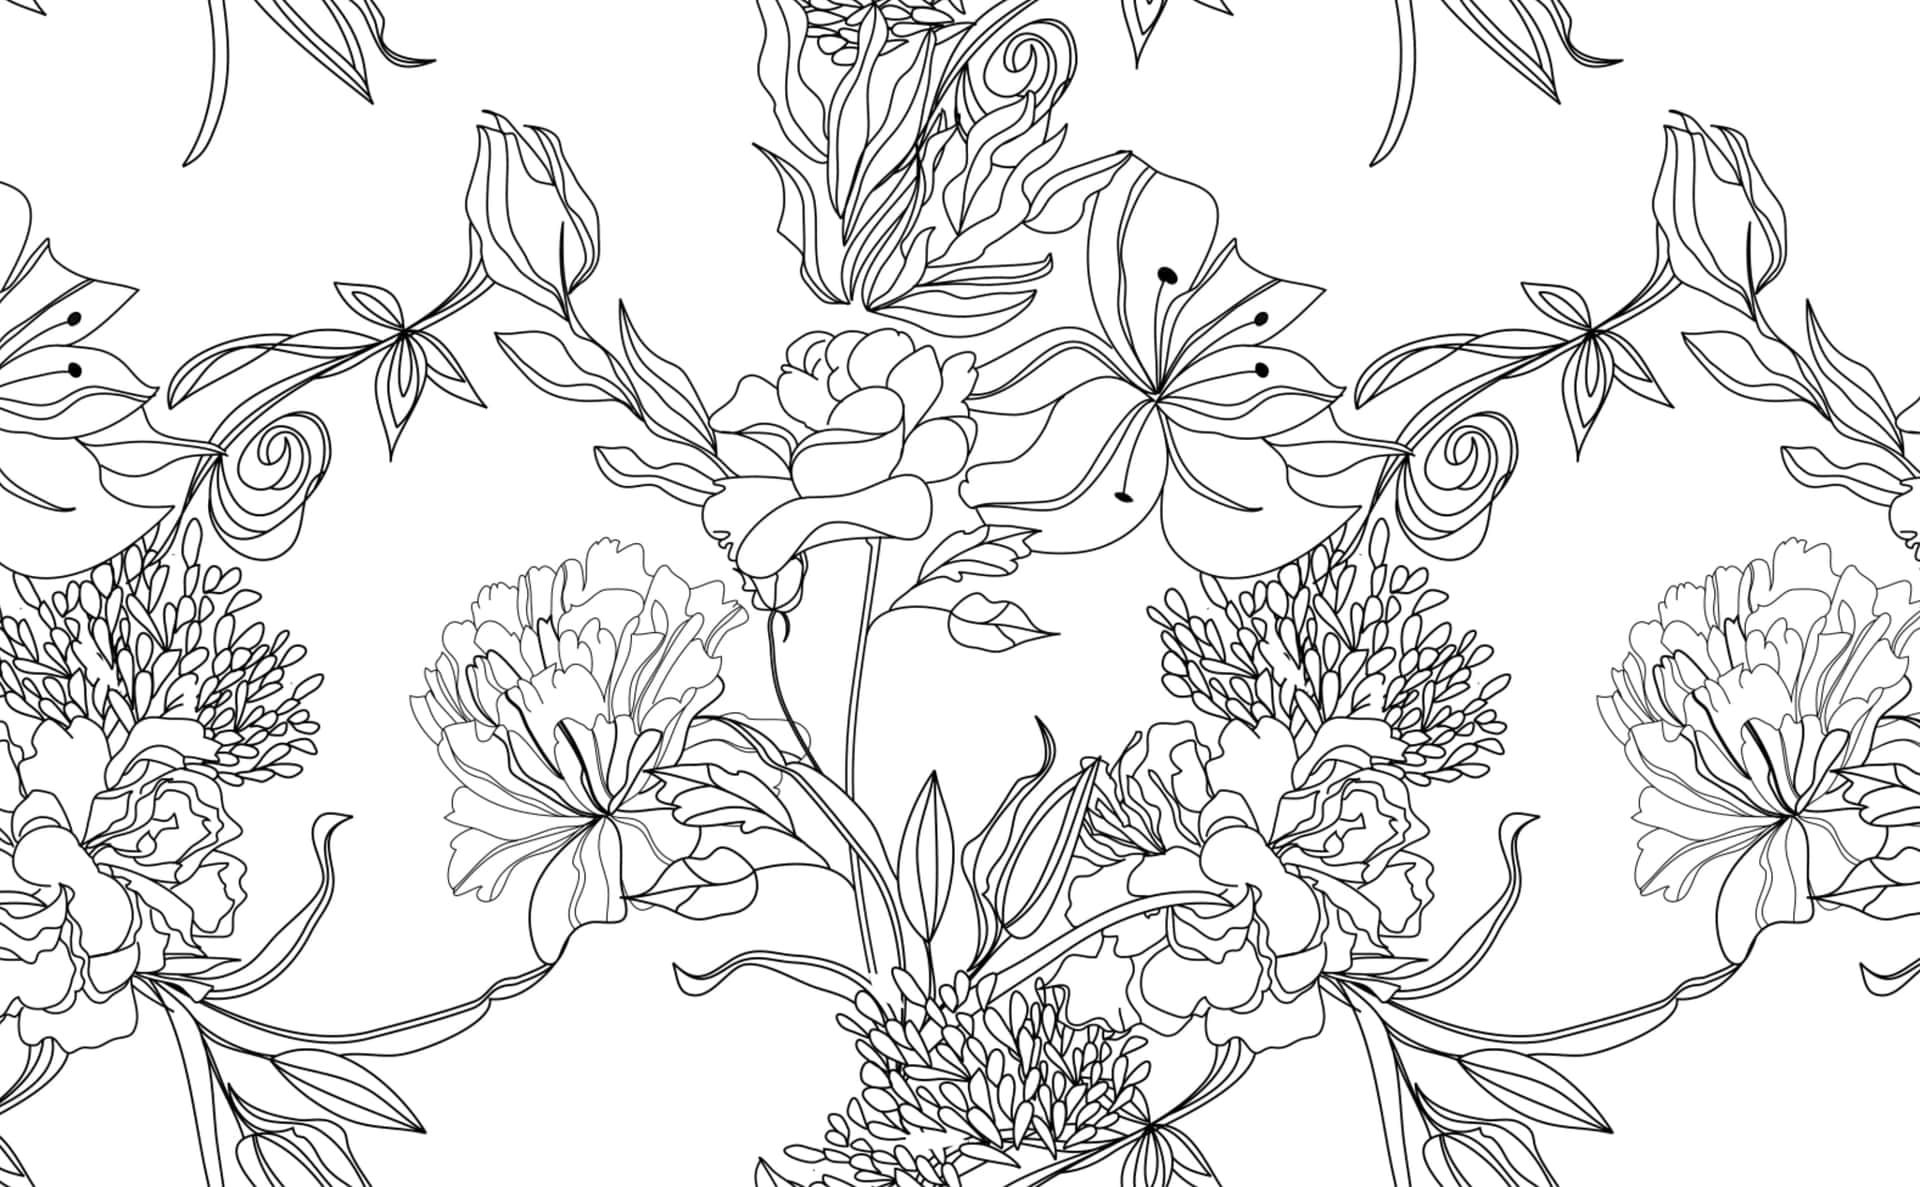 Textile Pattern with Flourishing Blooms